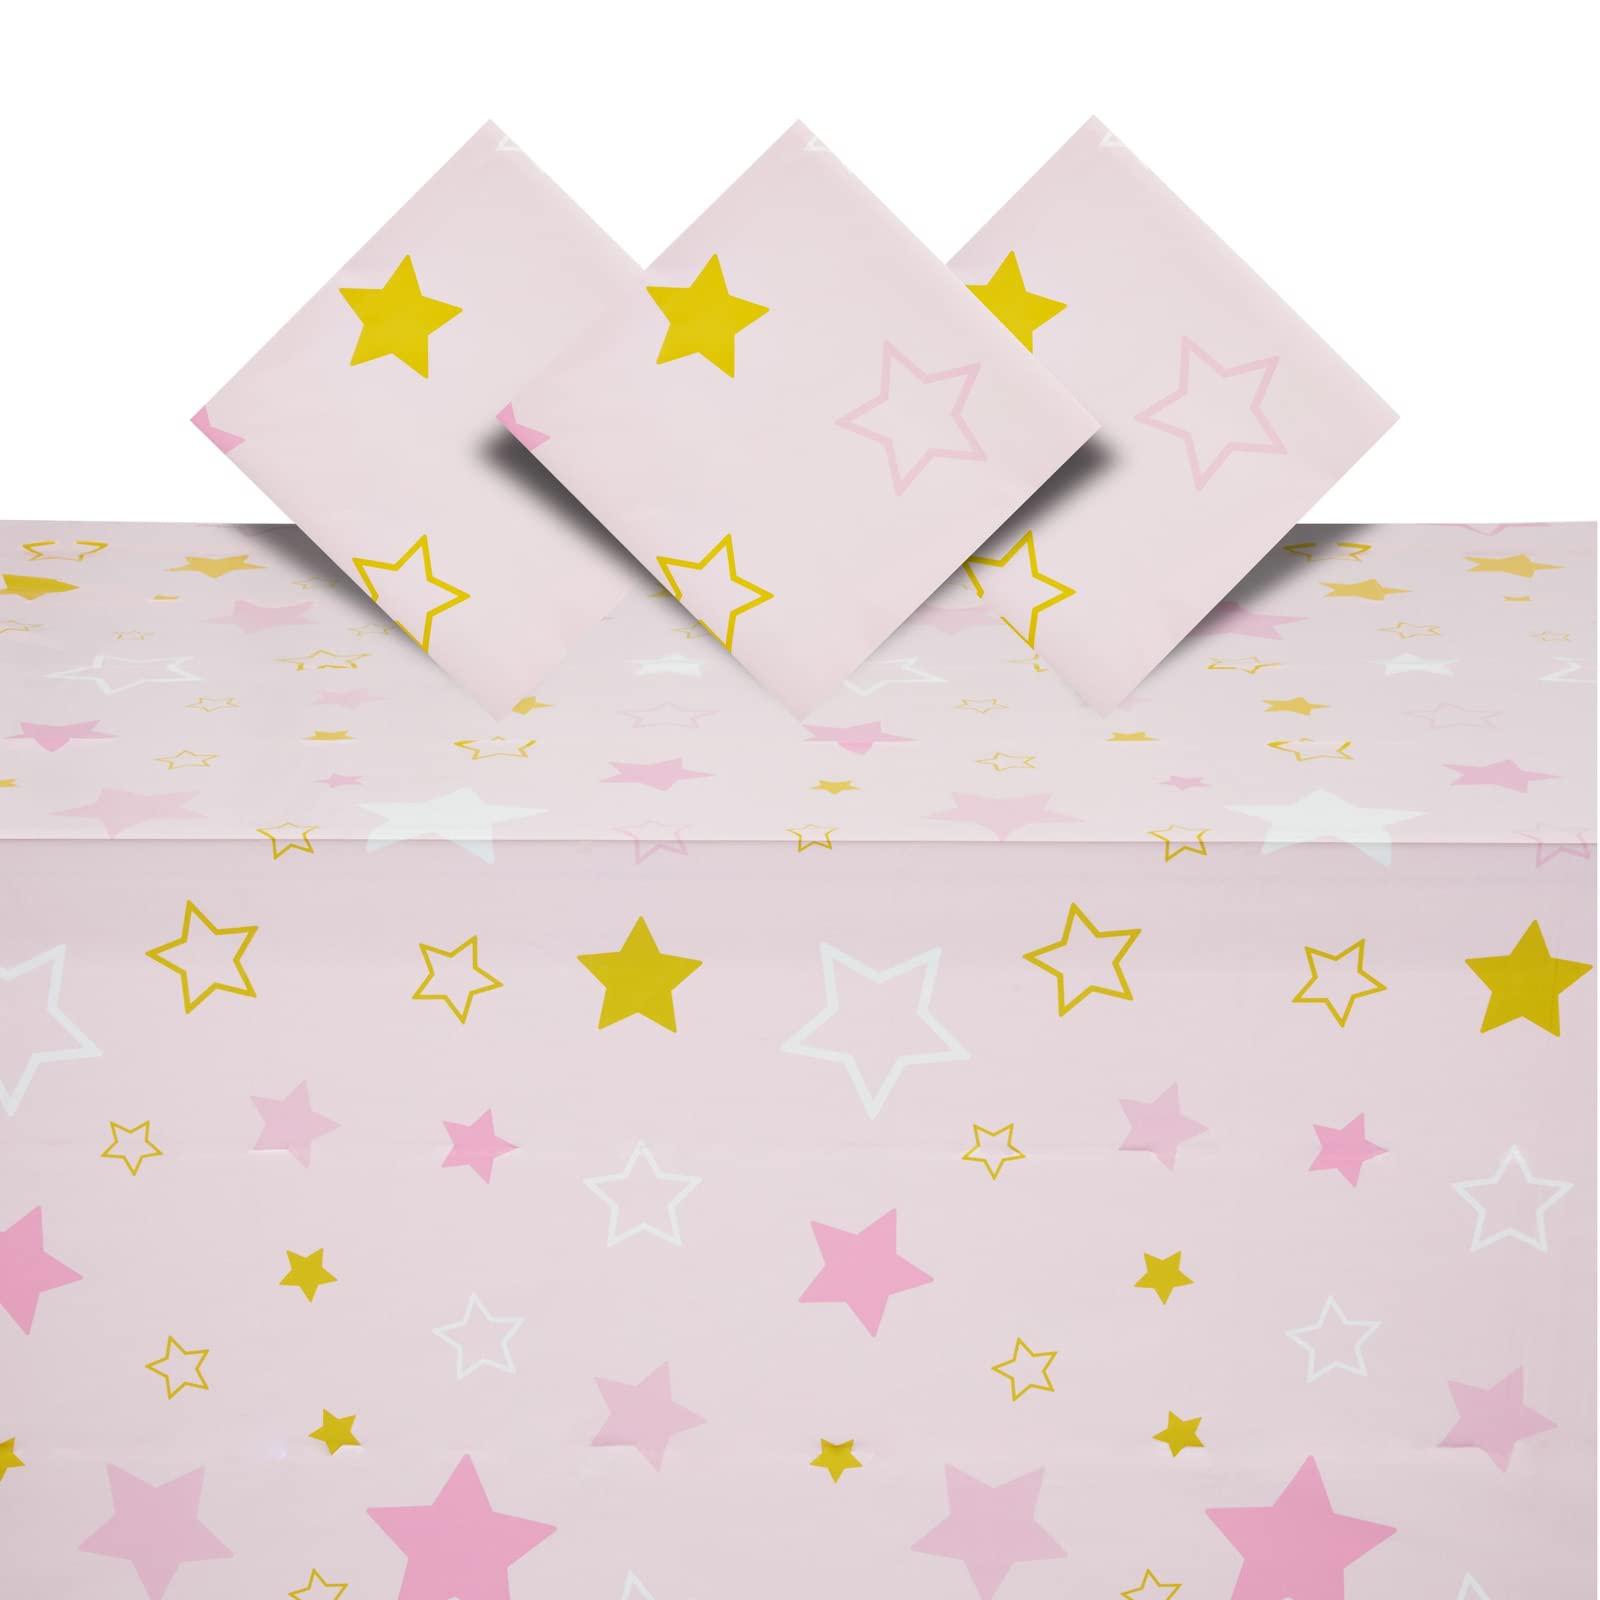 blue panda 3 pack pink plastic table covers for girls twinkle twinkle little star baby shower decorations (54 x 108 in)